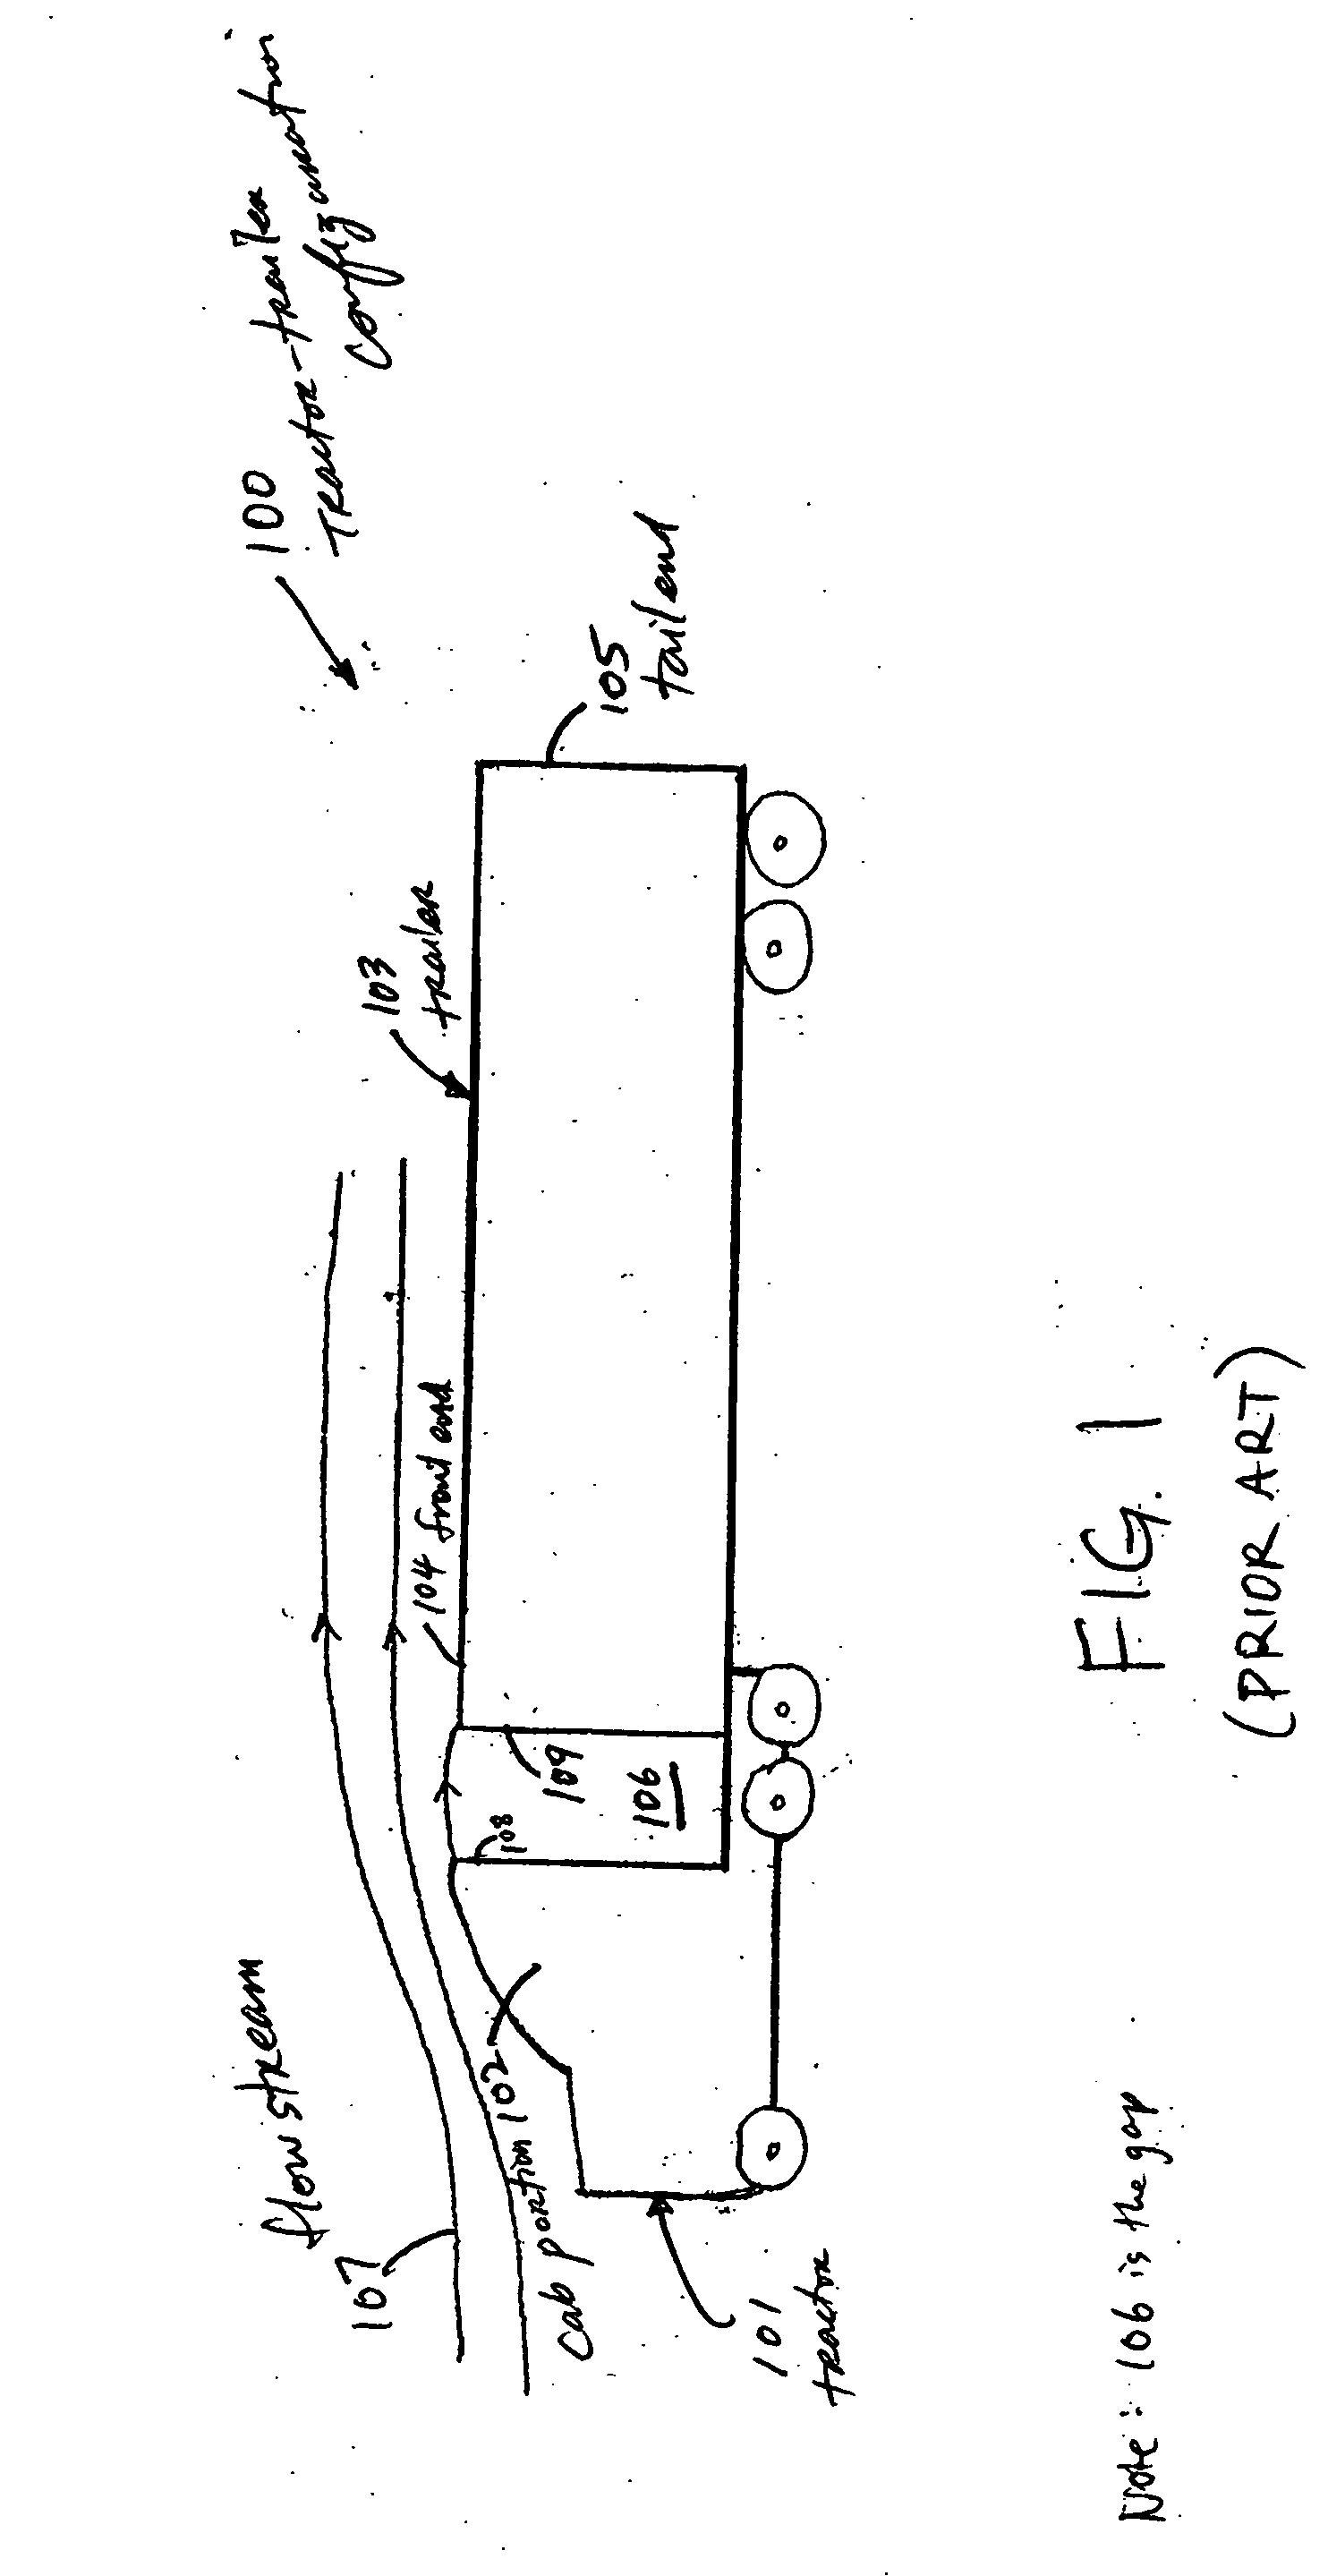 Aerodynamic drag reduction apparatus for gap-divided bluff bodies such as tractor-trailers